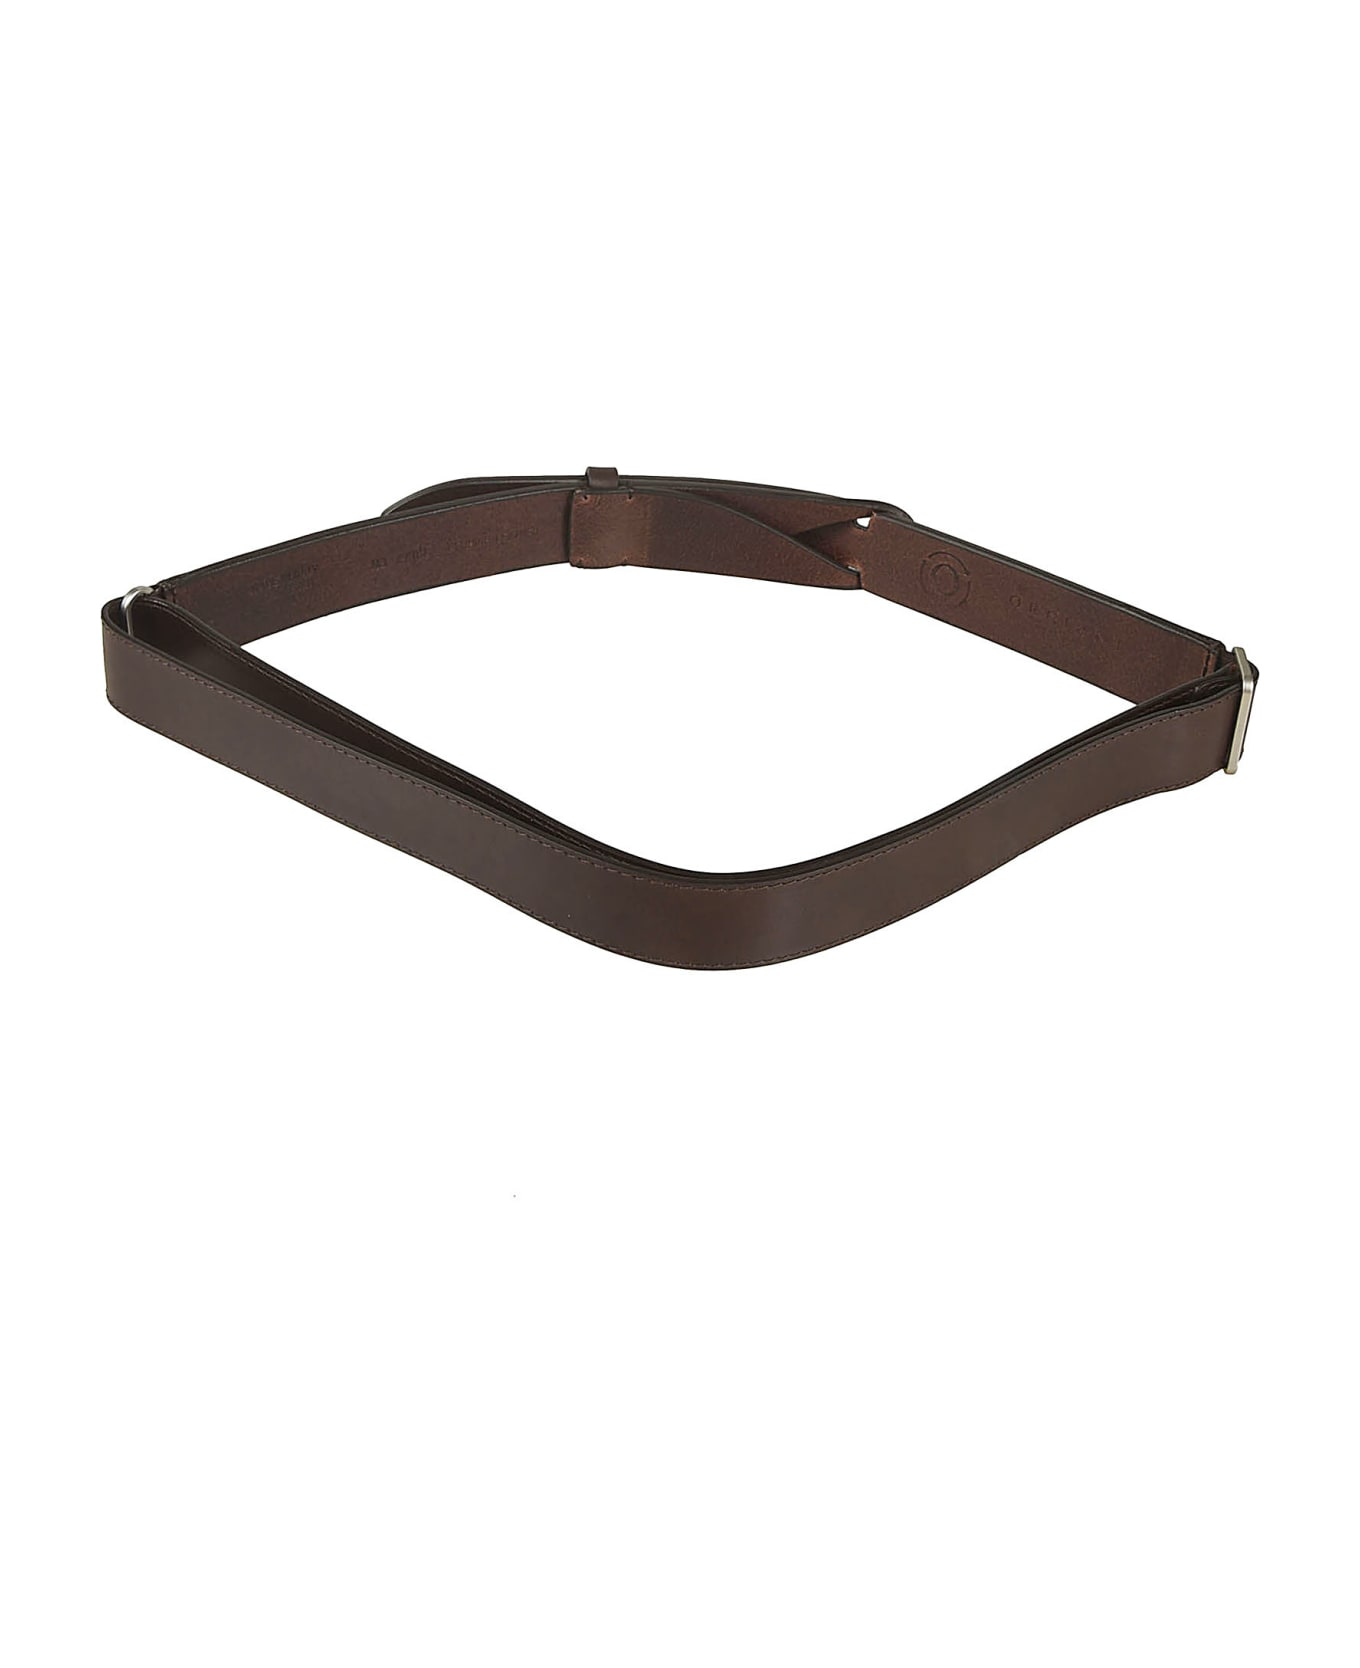 Orciani No Buckle Belt - Brown